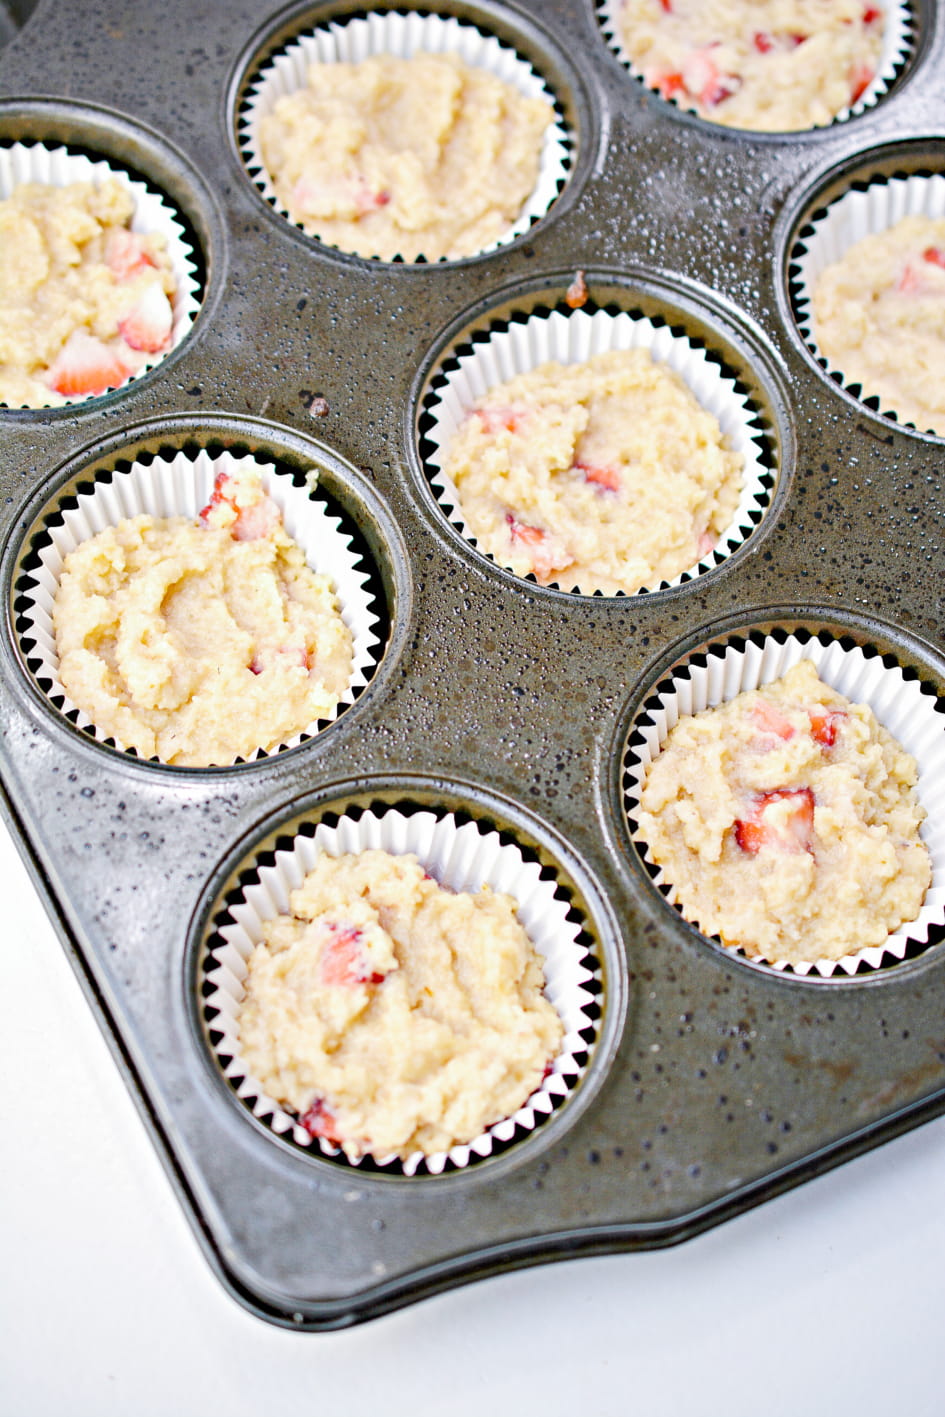 Decadent keto strawberry muffins ready for the oven.